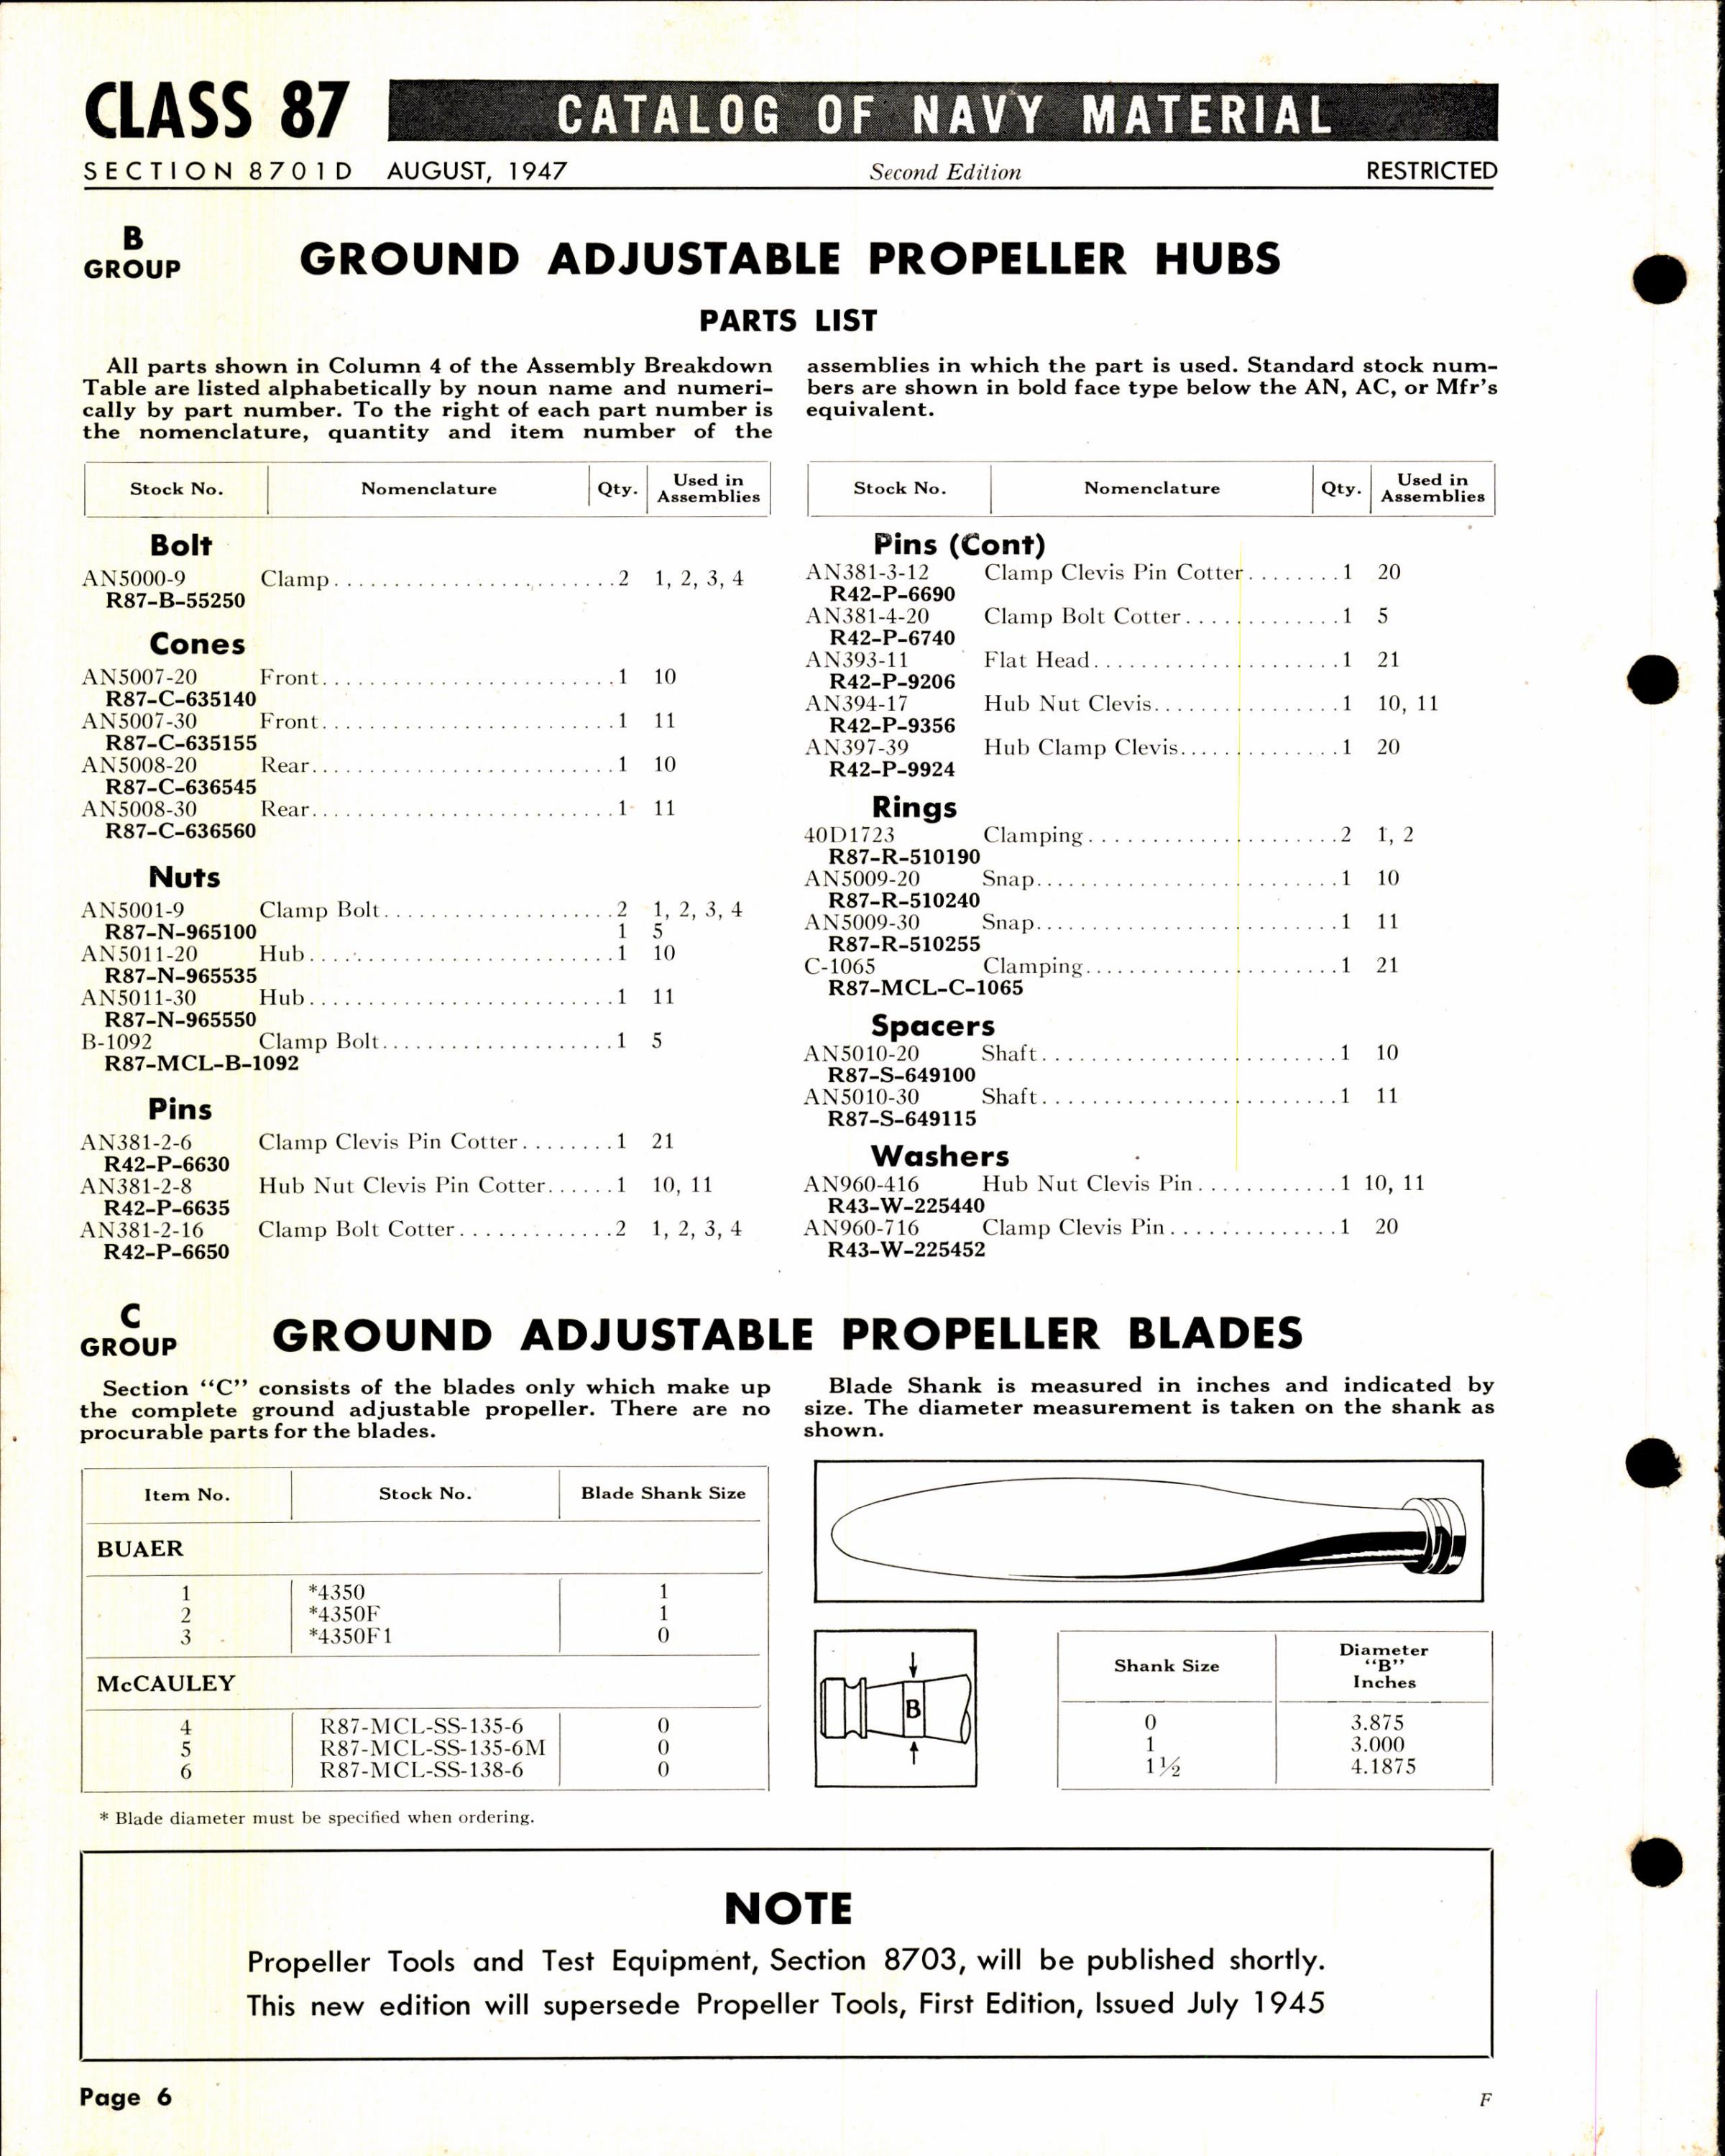 Sample page 6 from AirCorps Library document: Miscellaneous Propellers